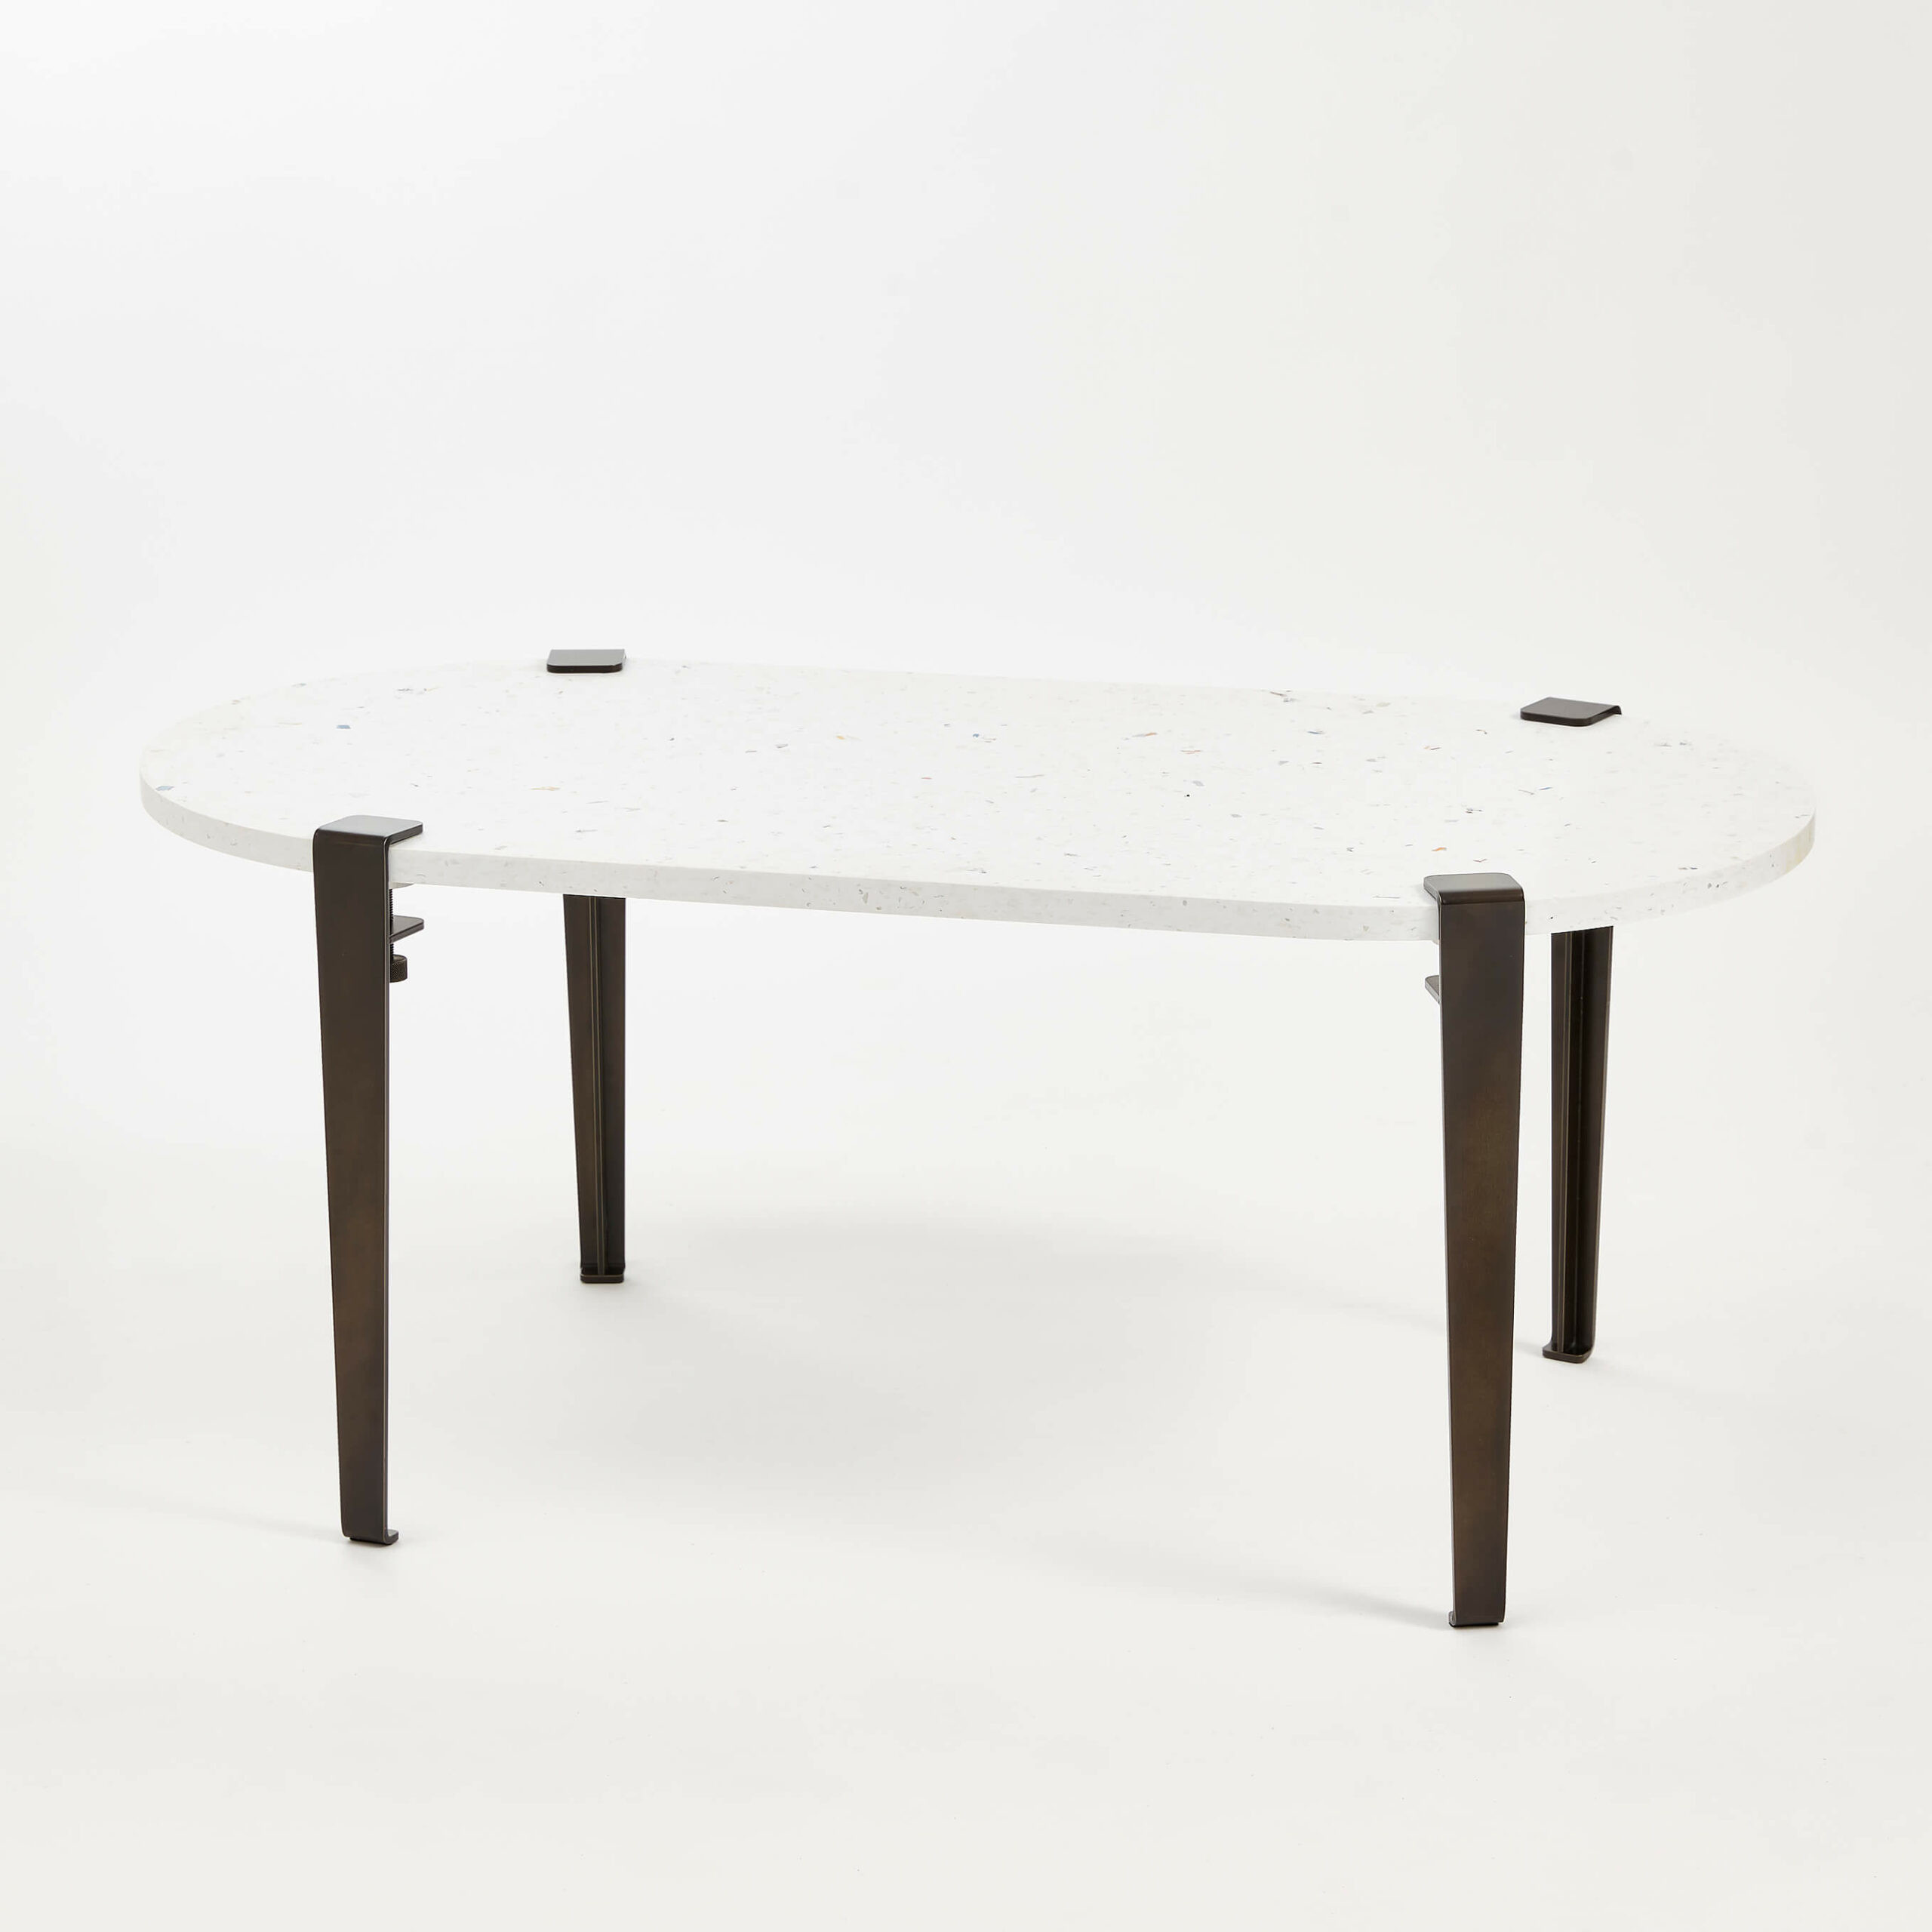 VENEZIA oblong recycled plastic coffee table